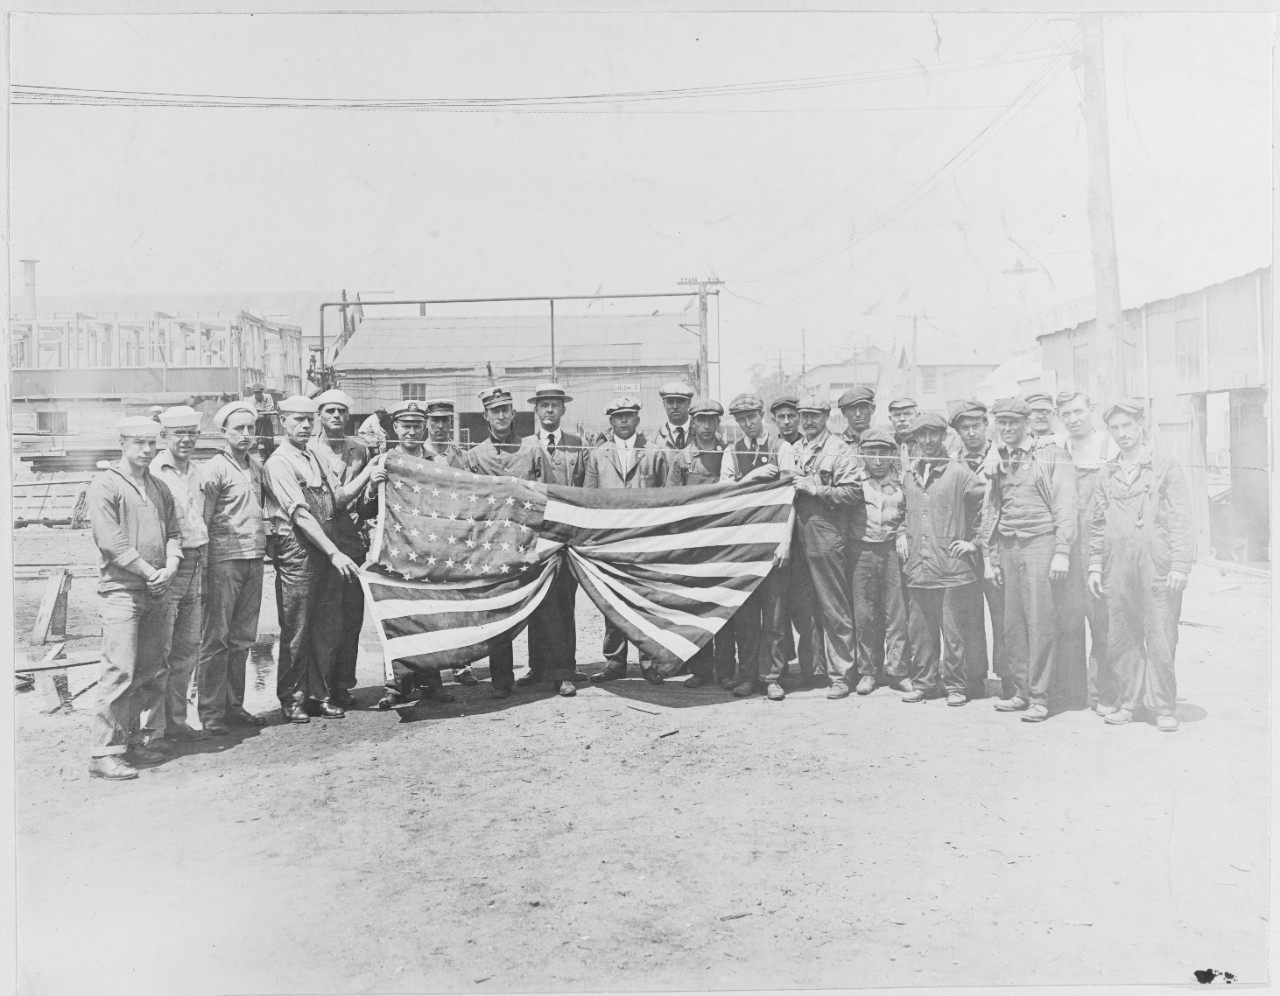 Employees of Lake Torpedo Boat Company pose for portrait holding large American Flag